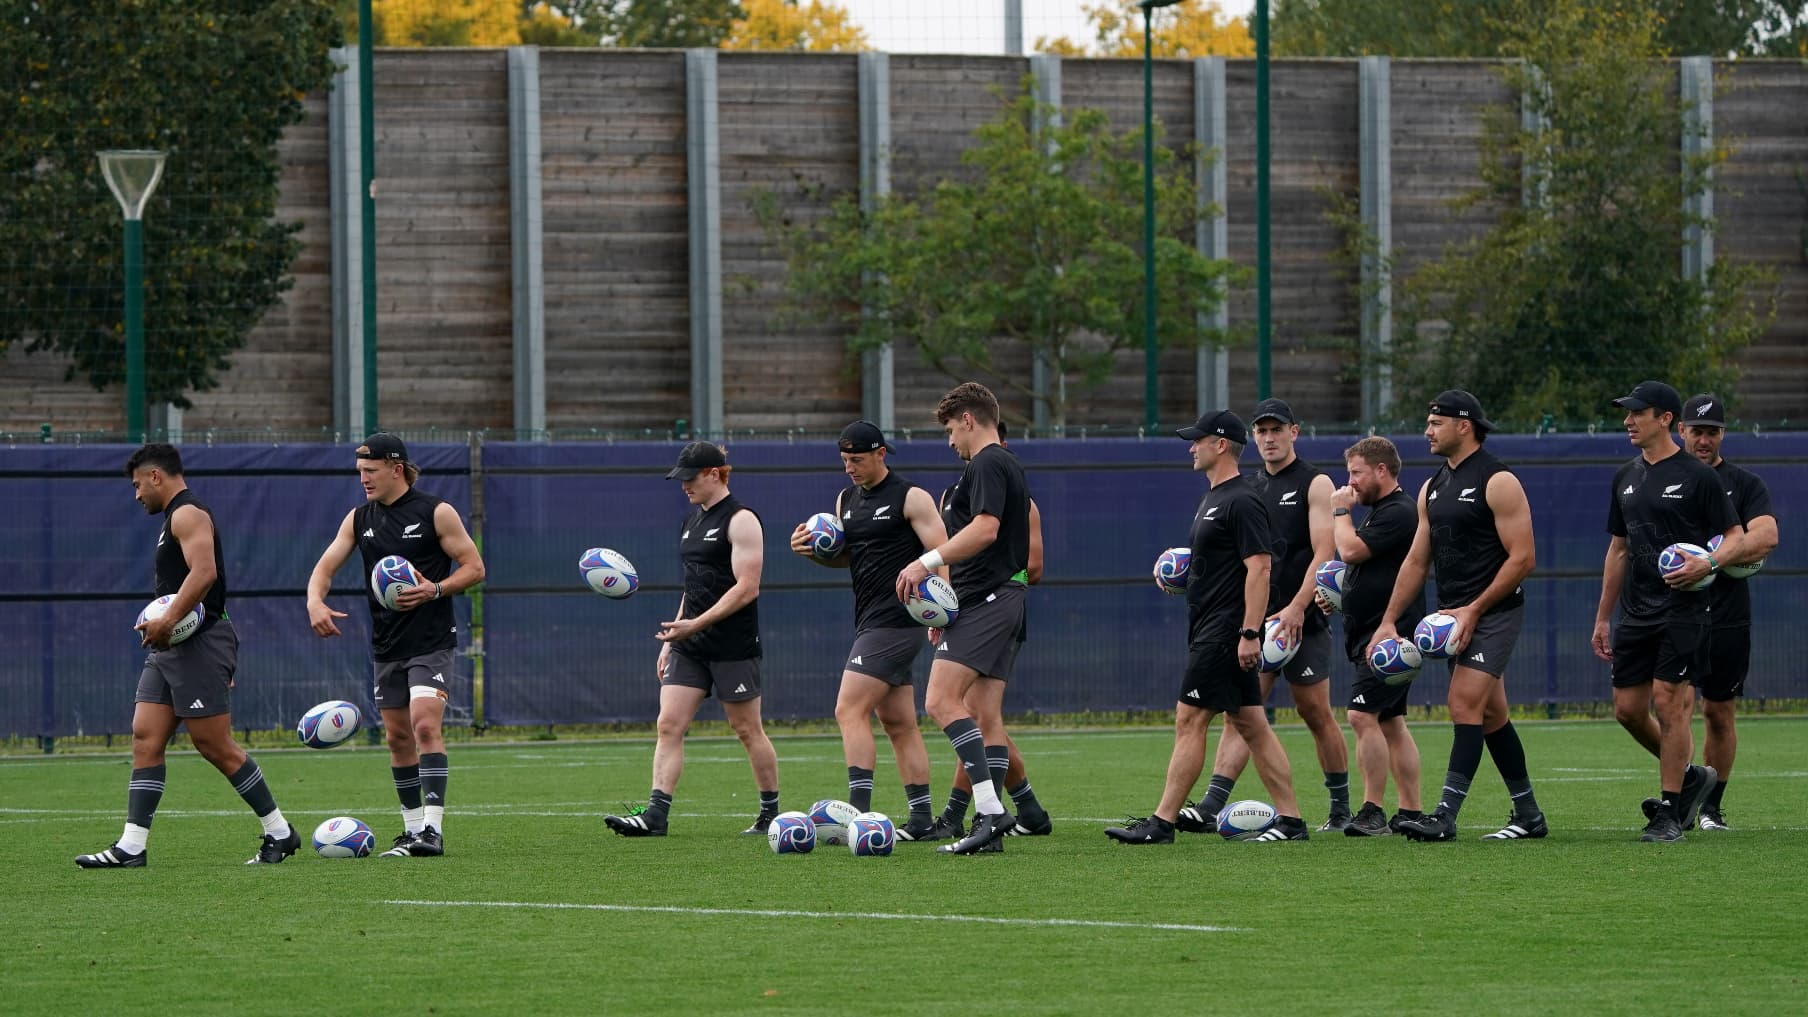 Ireland is suspected of spying on training in New Zealand